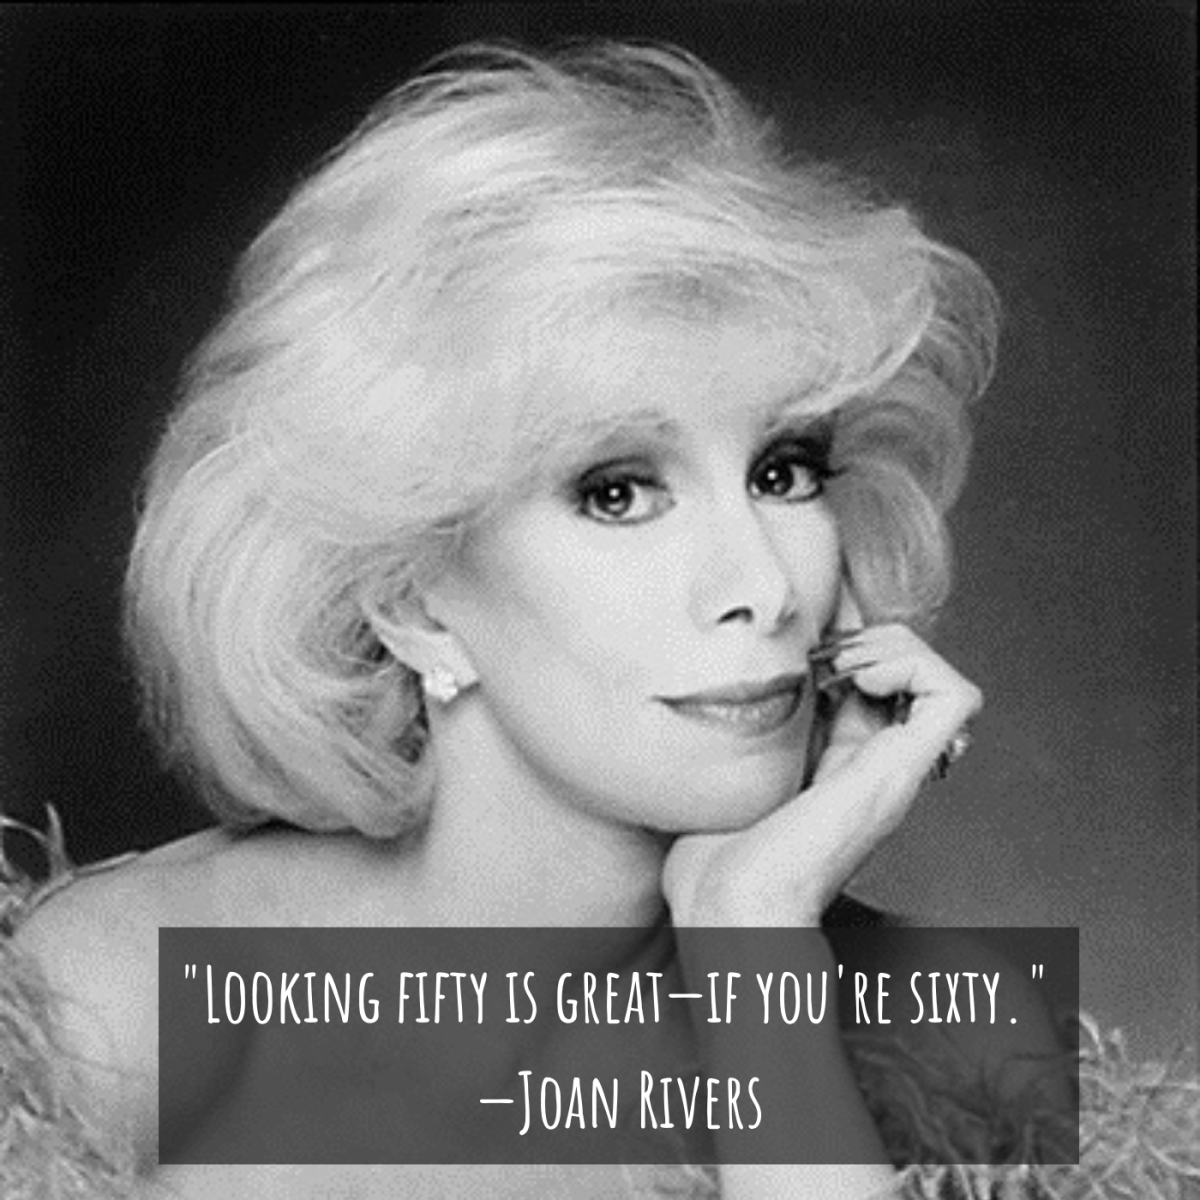 "Looking fifty is great—if you're sixty." —Joan Rivers